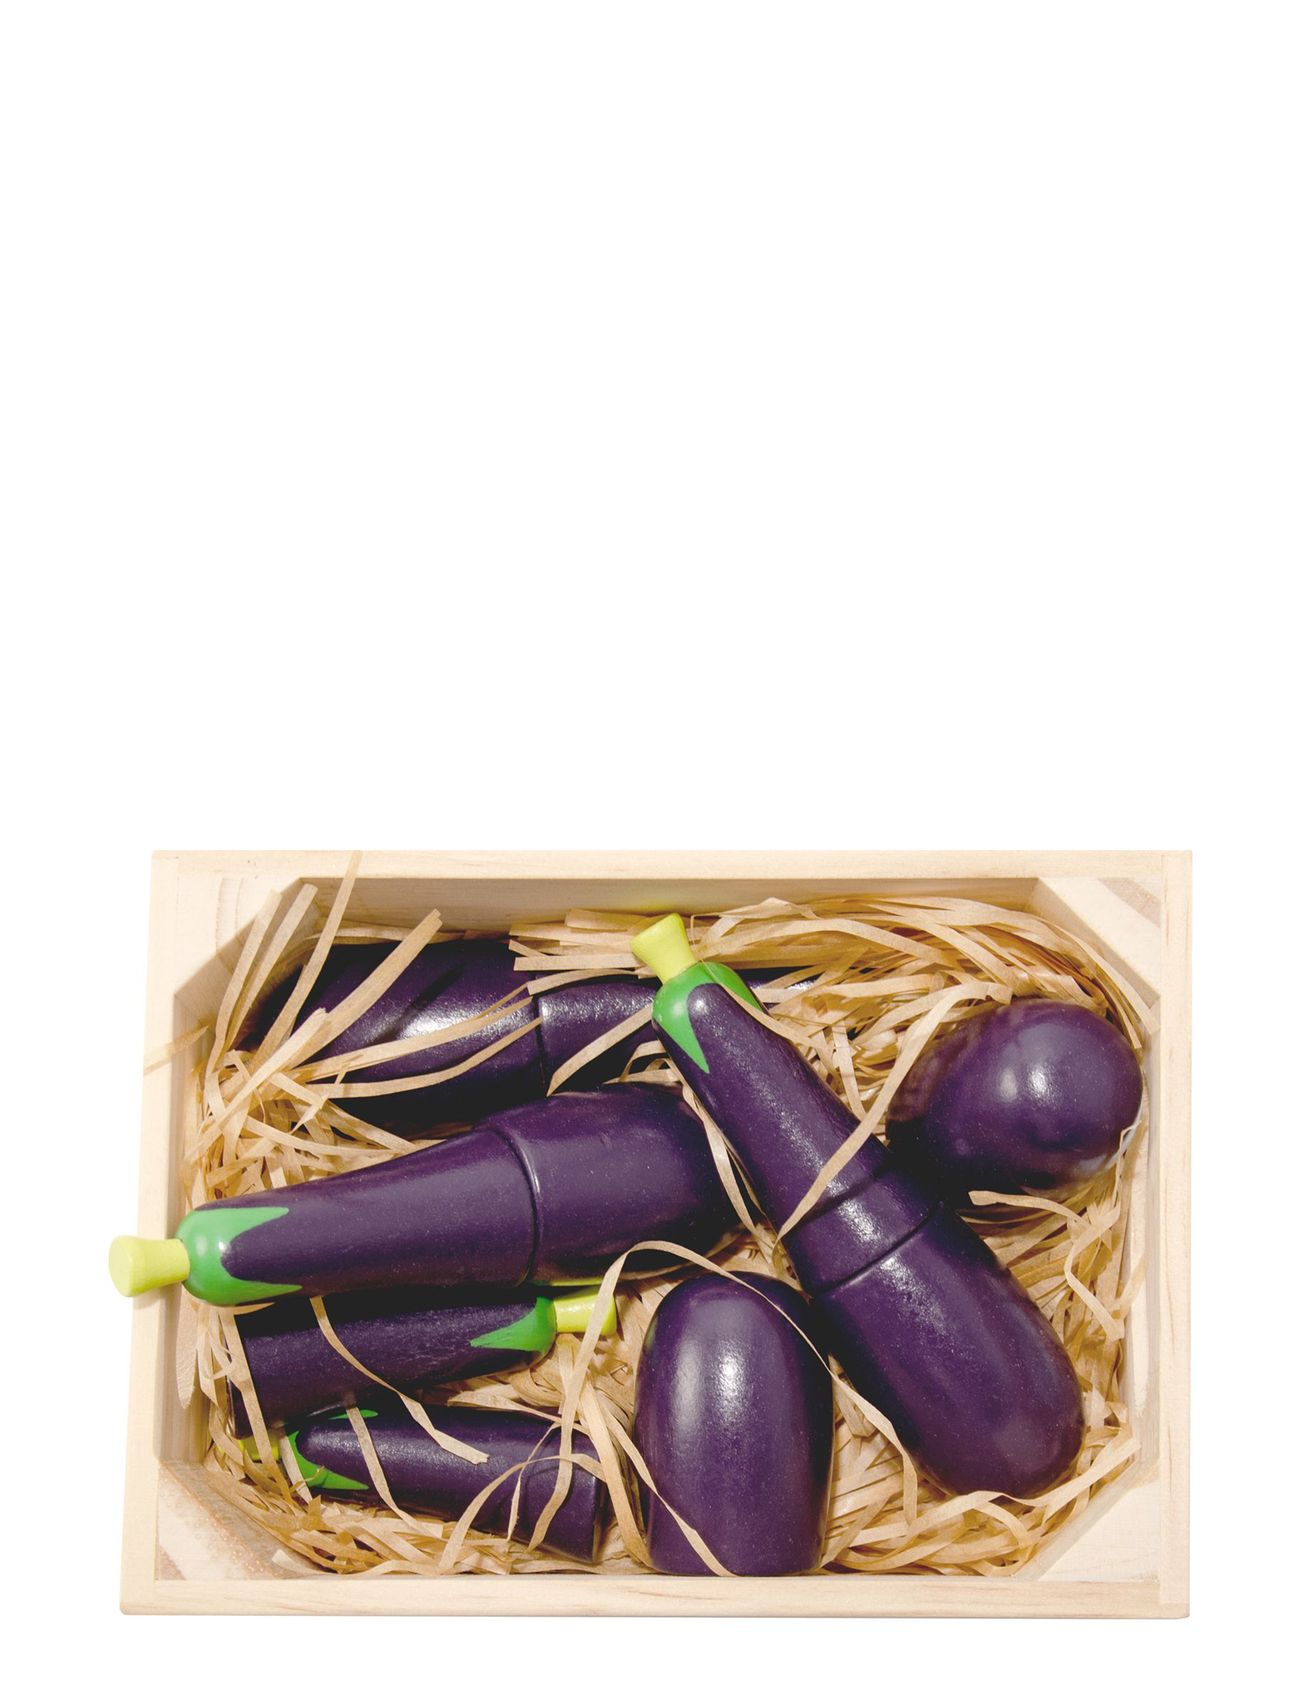 5 Eggplants With Magnet In A Box Toys Toy Kitchen & Accessories Toy Food & Cakes Purple Magni Toys